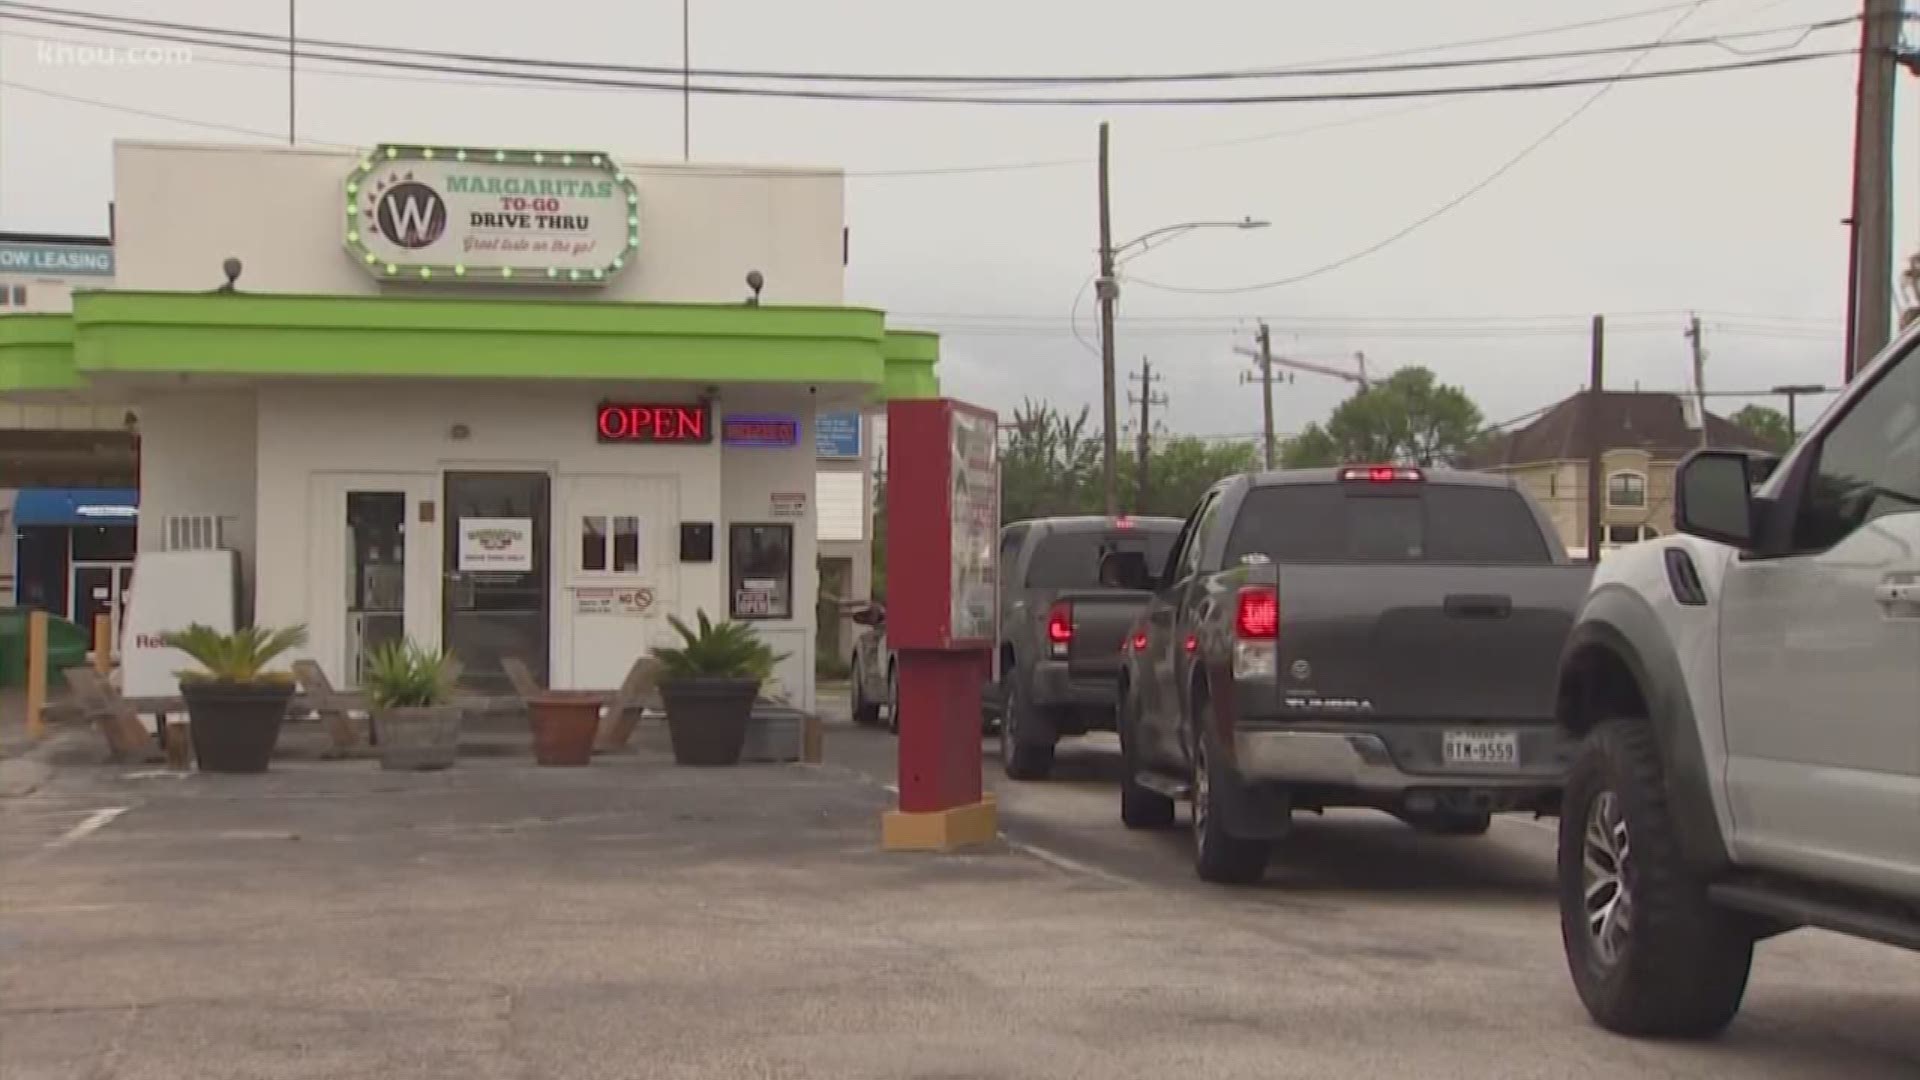 Since restrictions were put in place for restaurants due to the COVID-19 pandemic, one to-go margarita place in the Heights is seeing a boom in business.